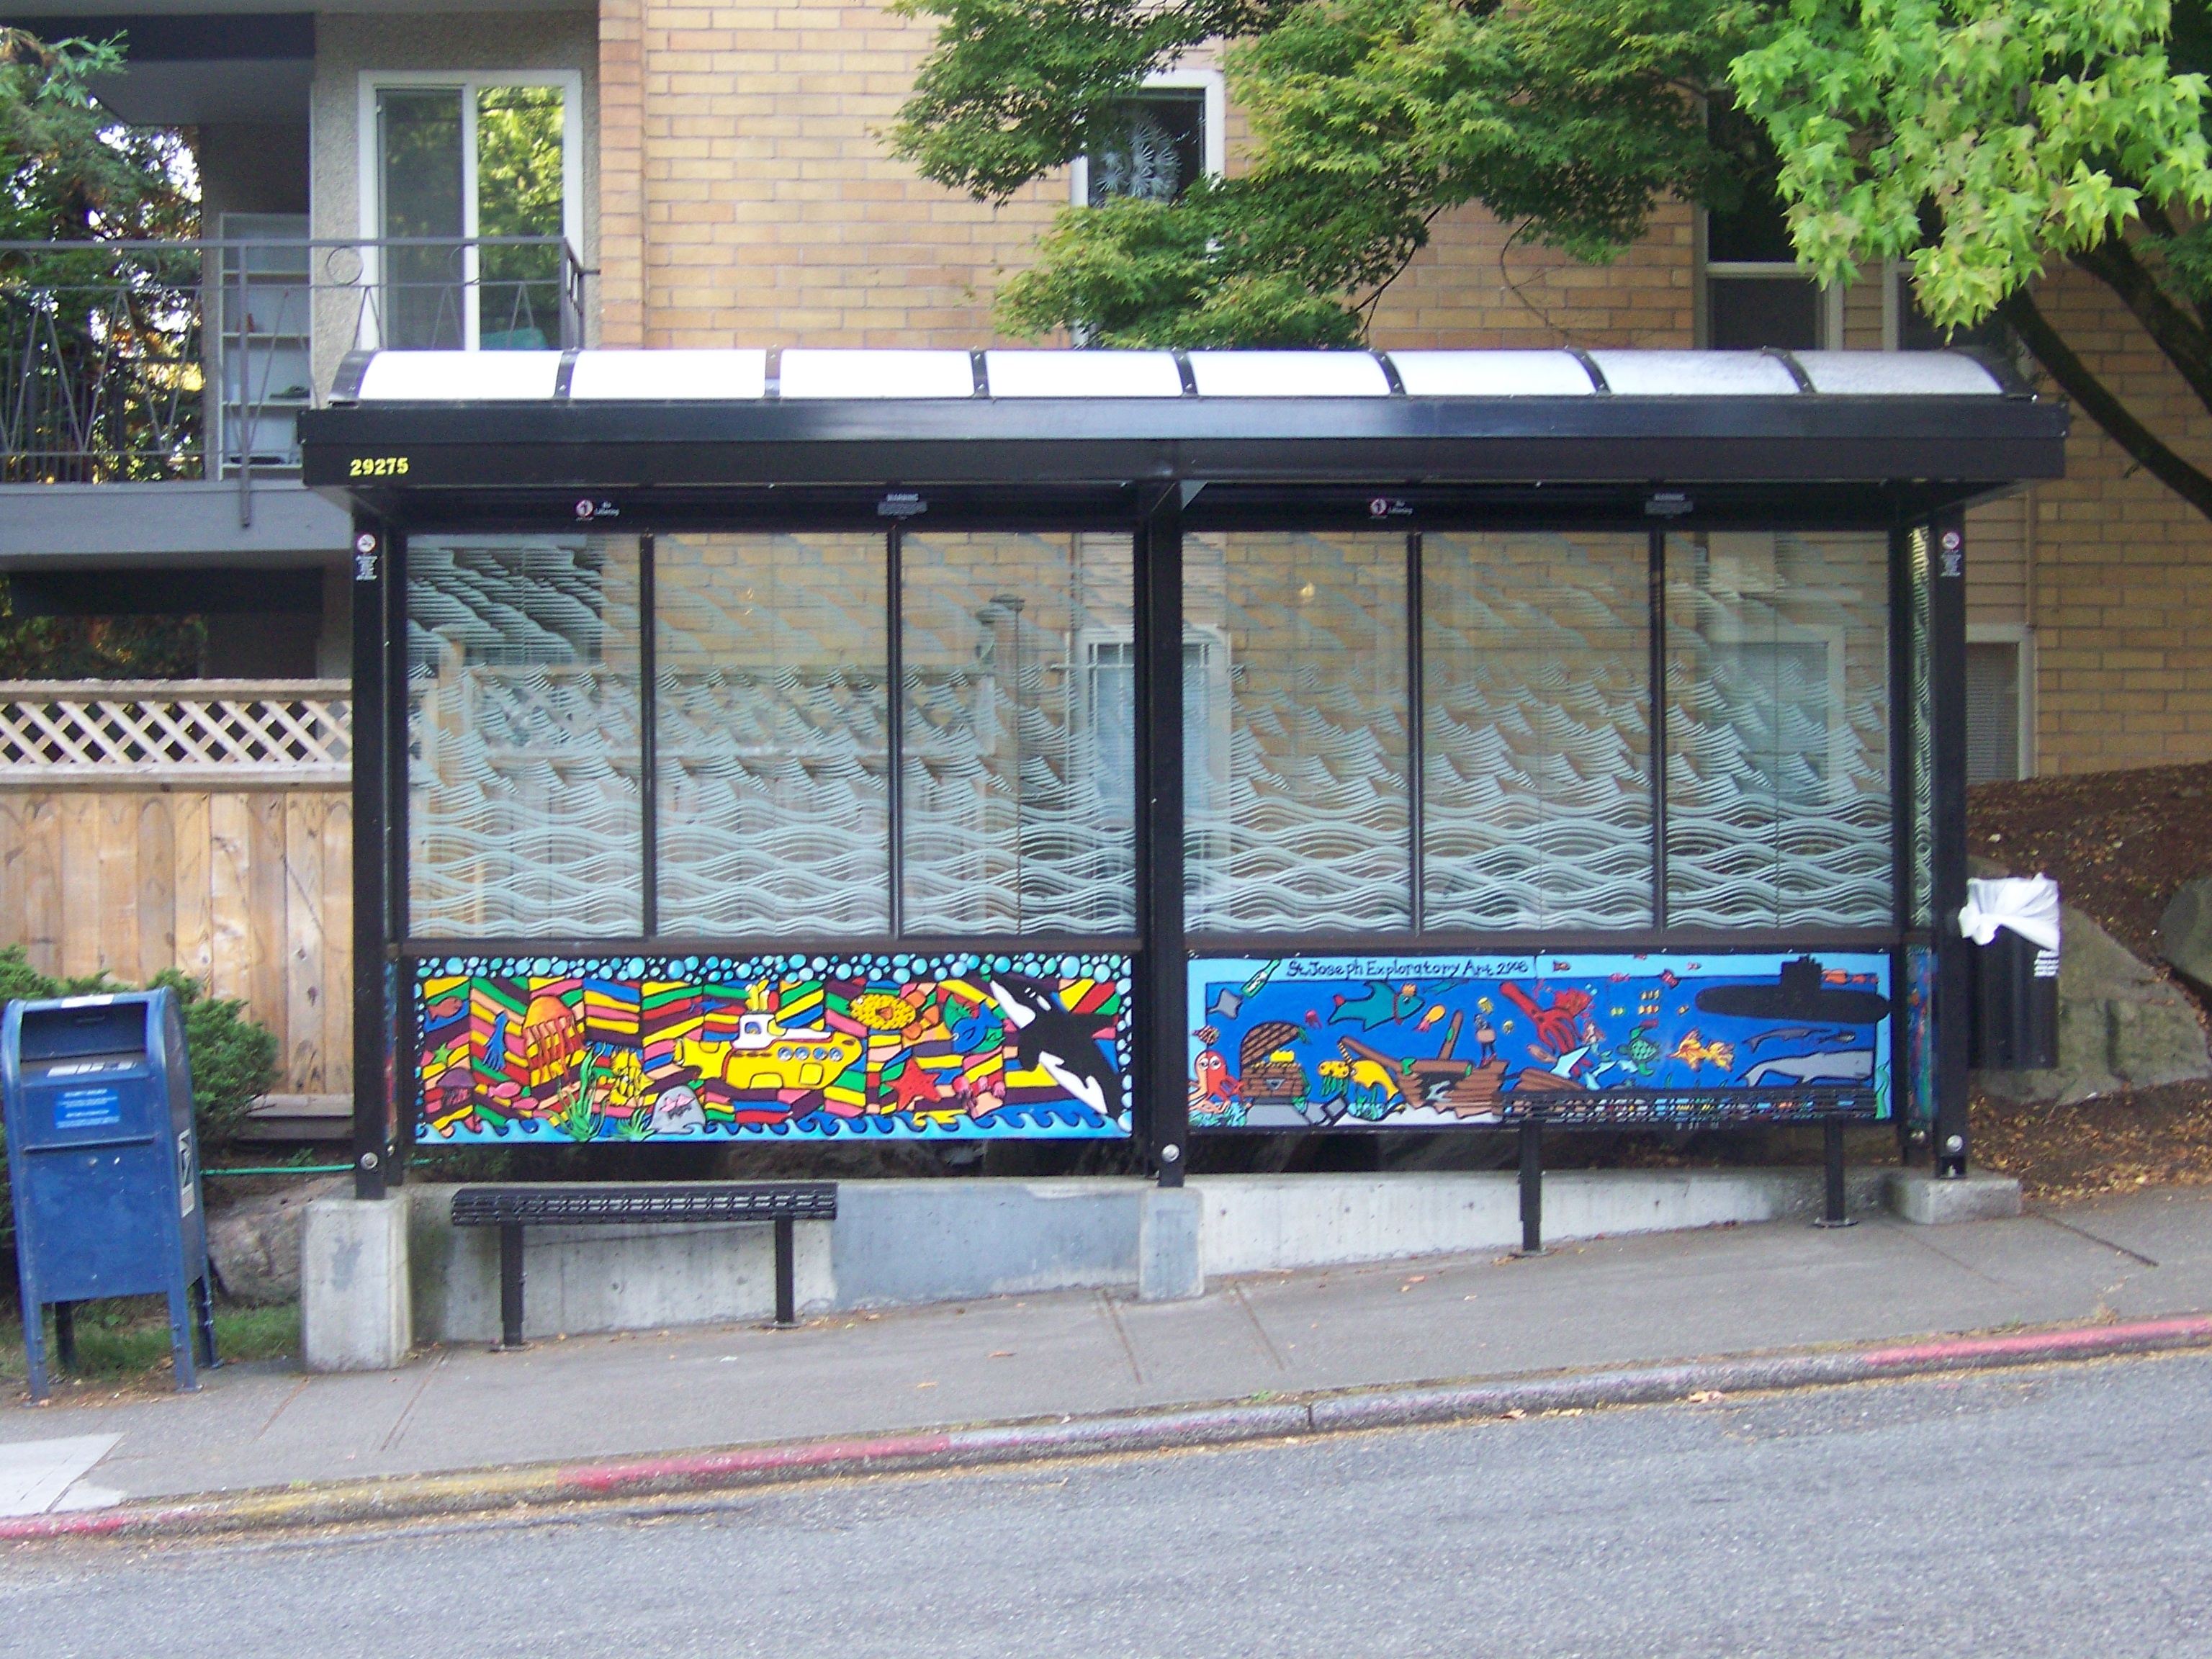 Capitol Hill, Seattle bus shelter with local art, King County Metro transit